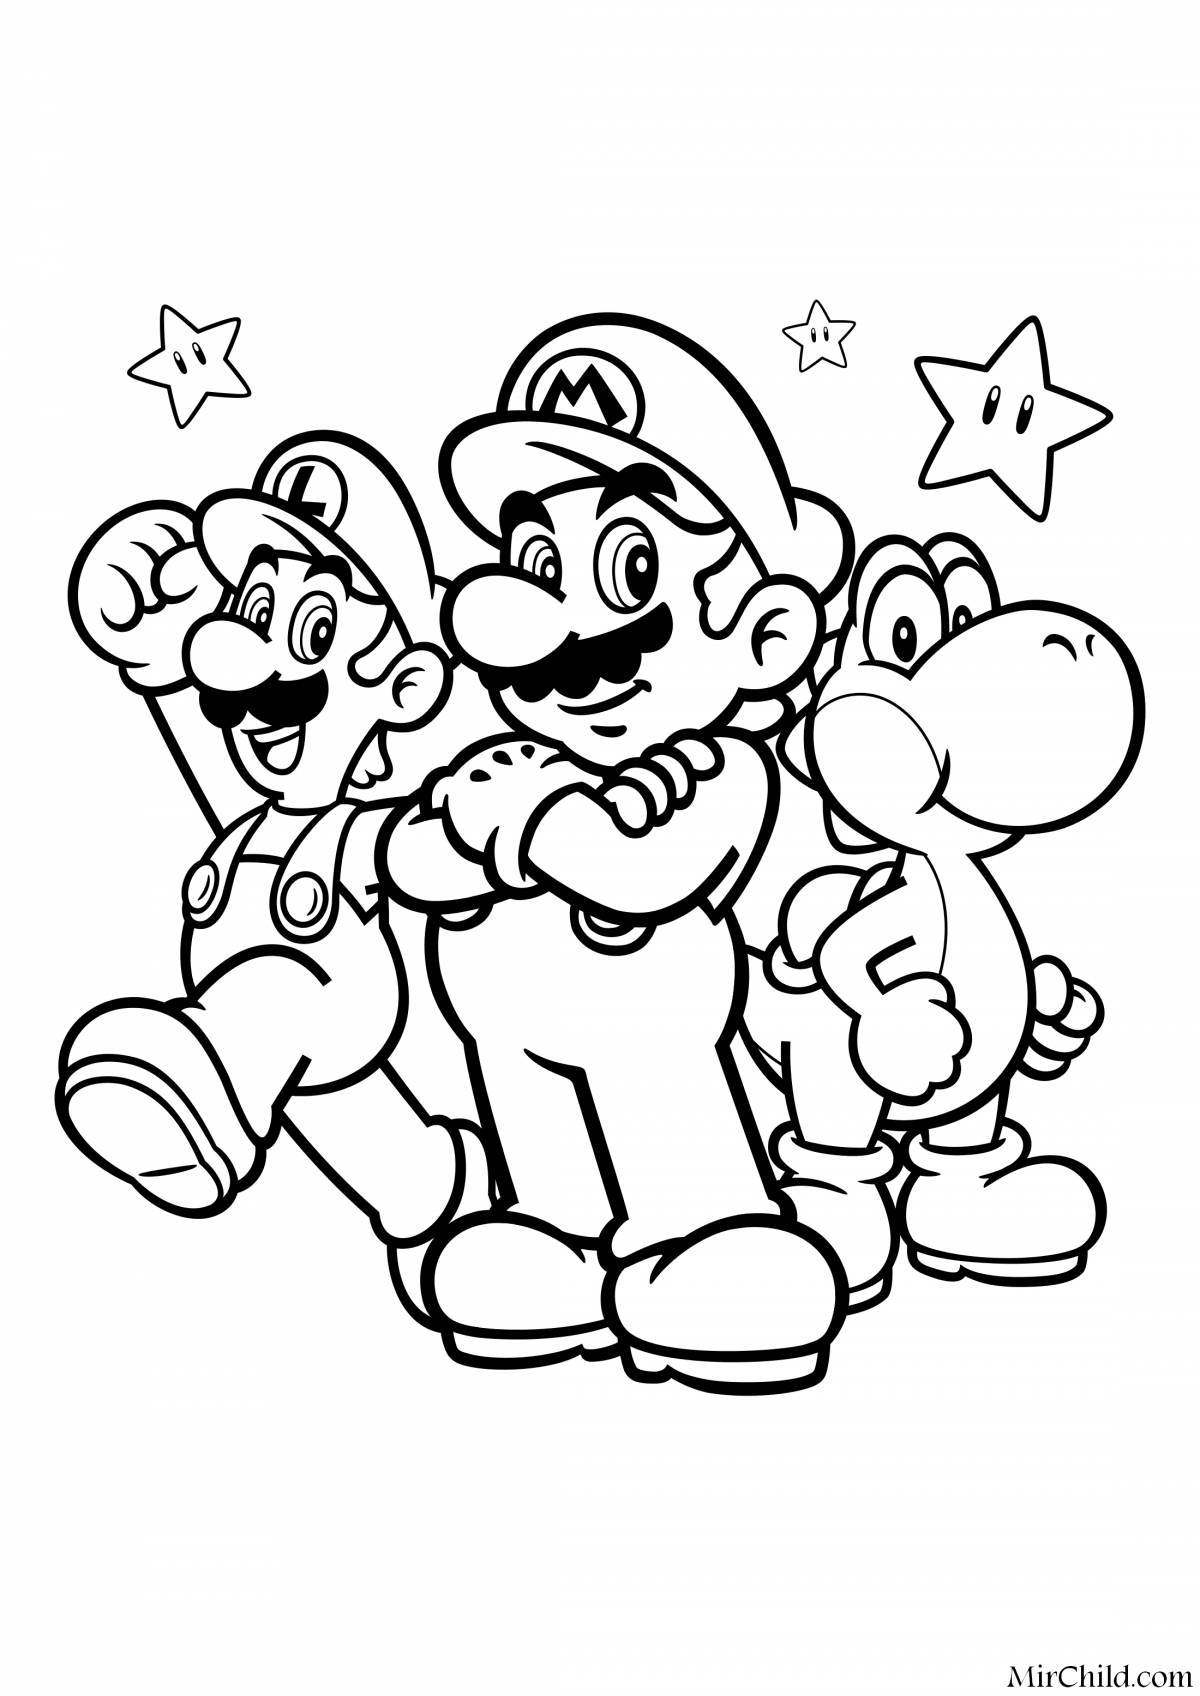 Playful super mario coloring page